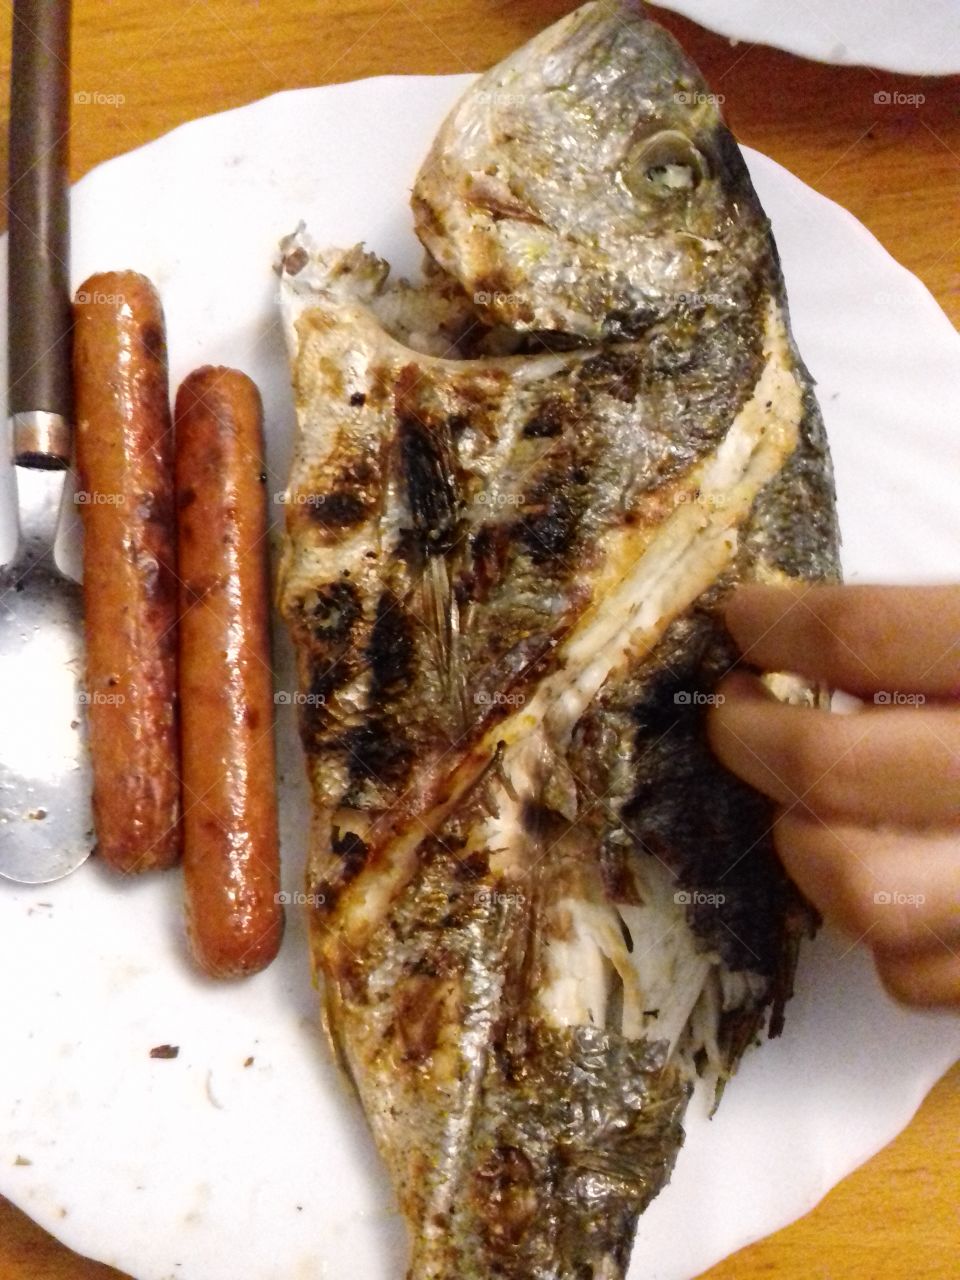 grilled fish and hot dog